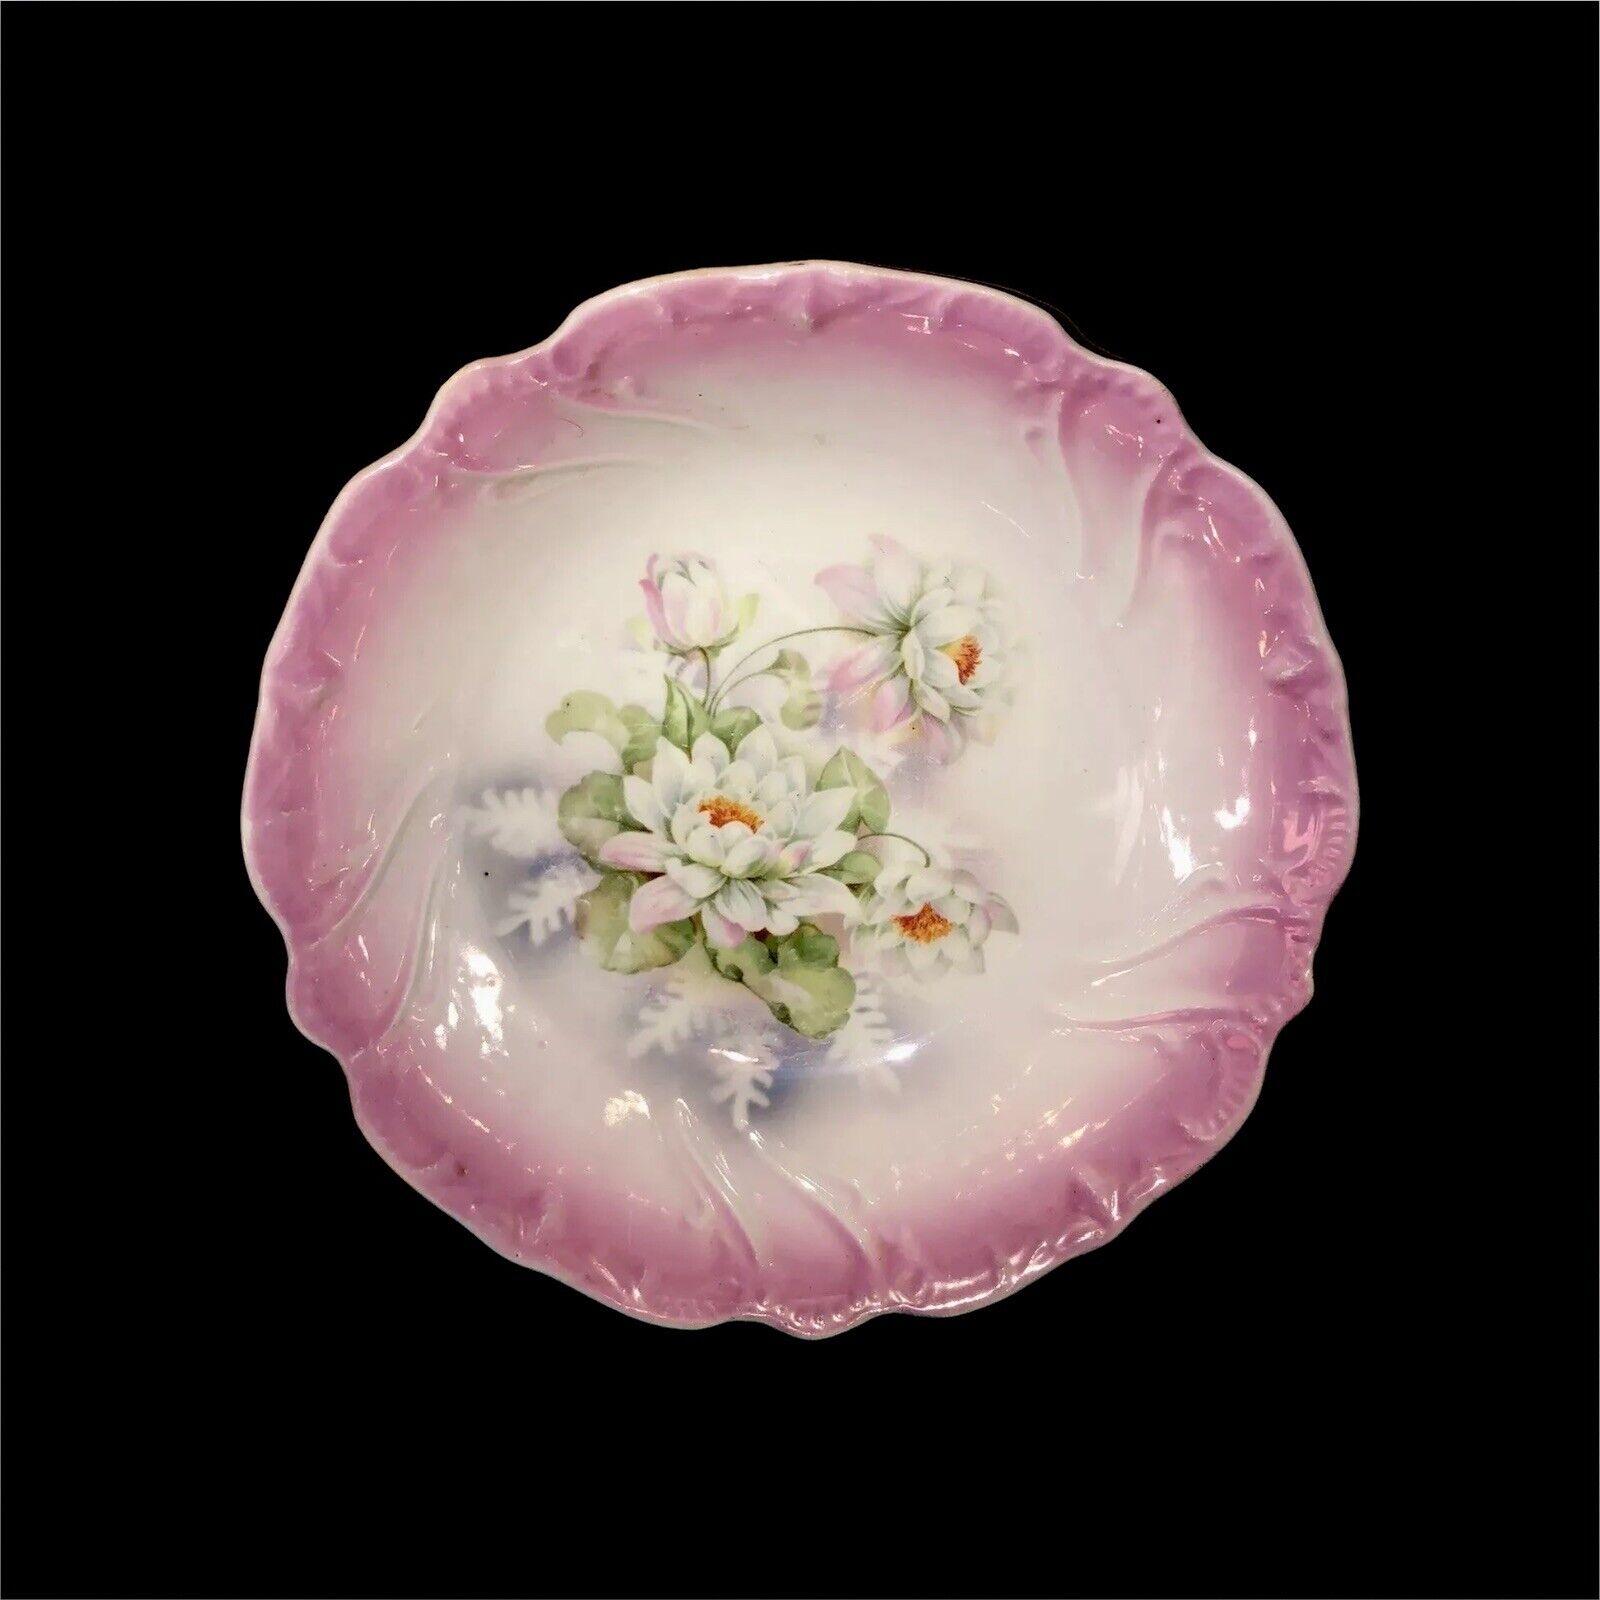 Large Antique Germany Ceramic Serving Bowl Peonies ￼Roses Cottage Chic ￼